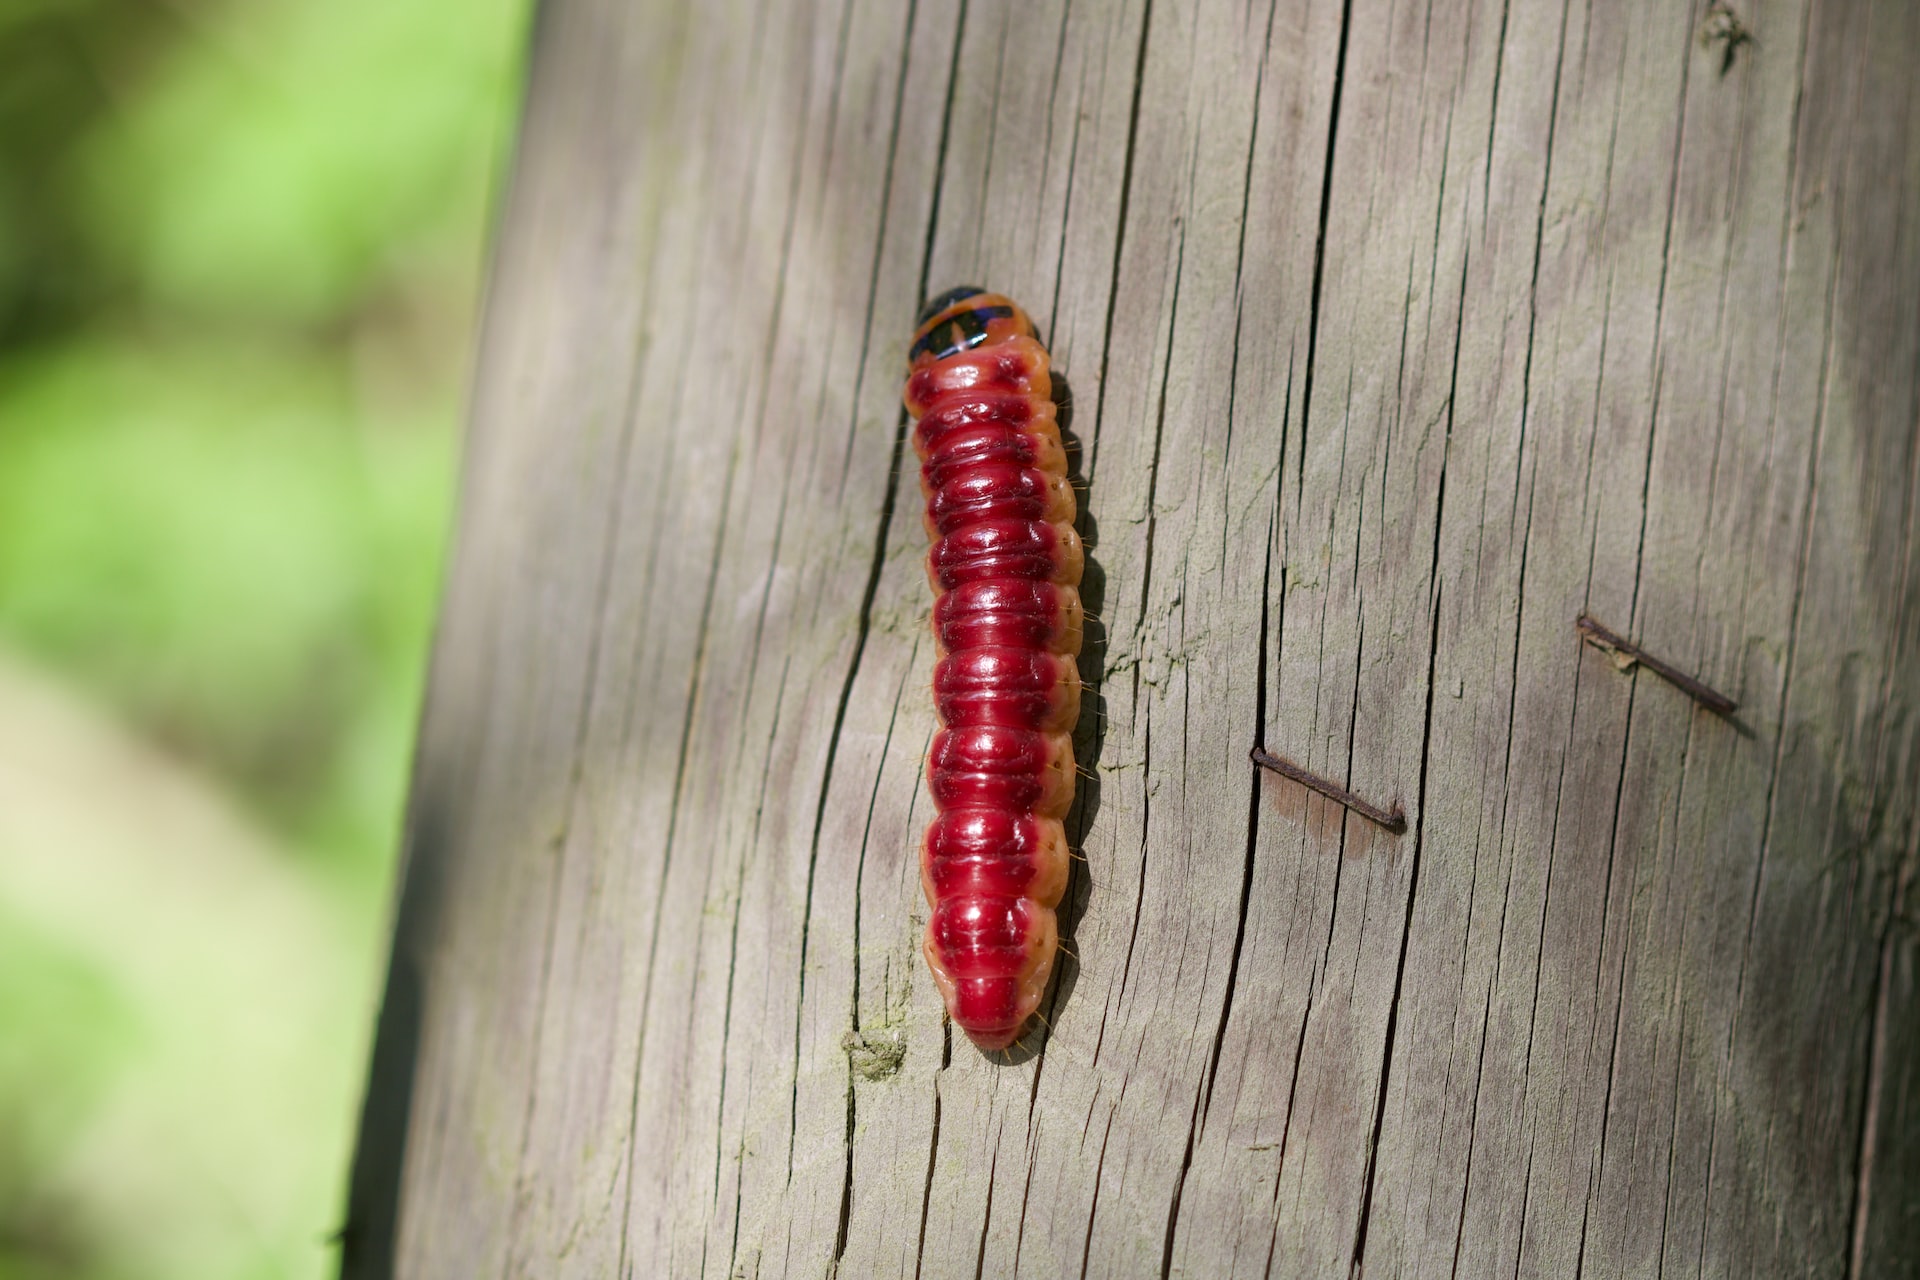 A Red Coloured Maggot On The Wood